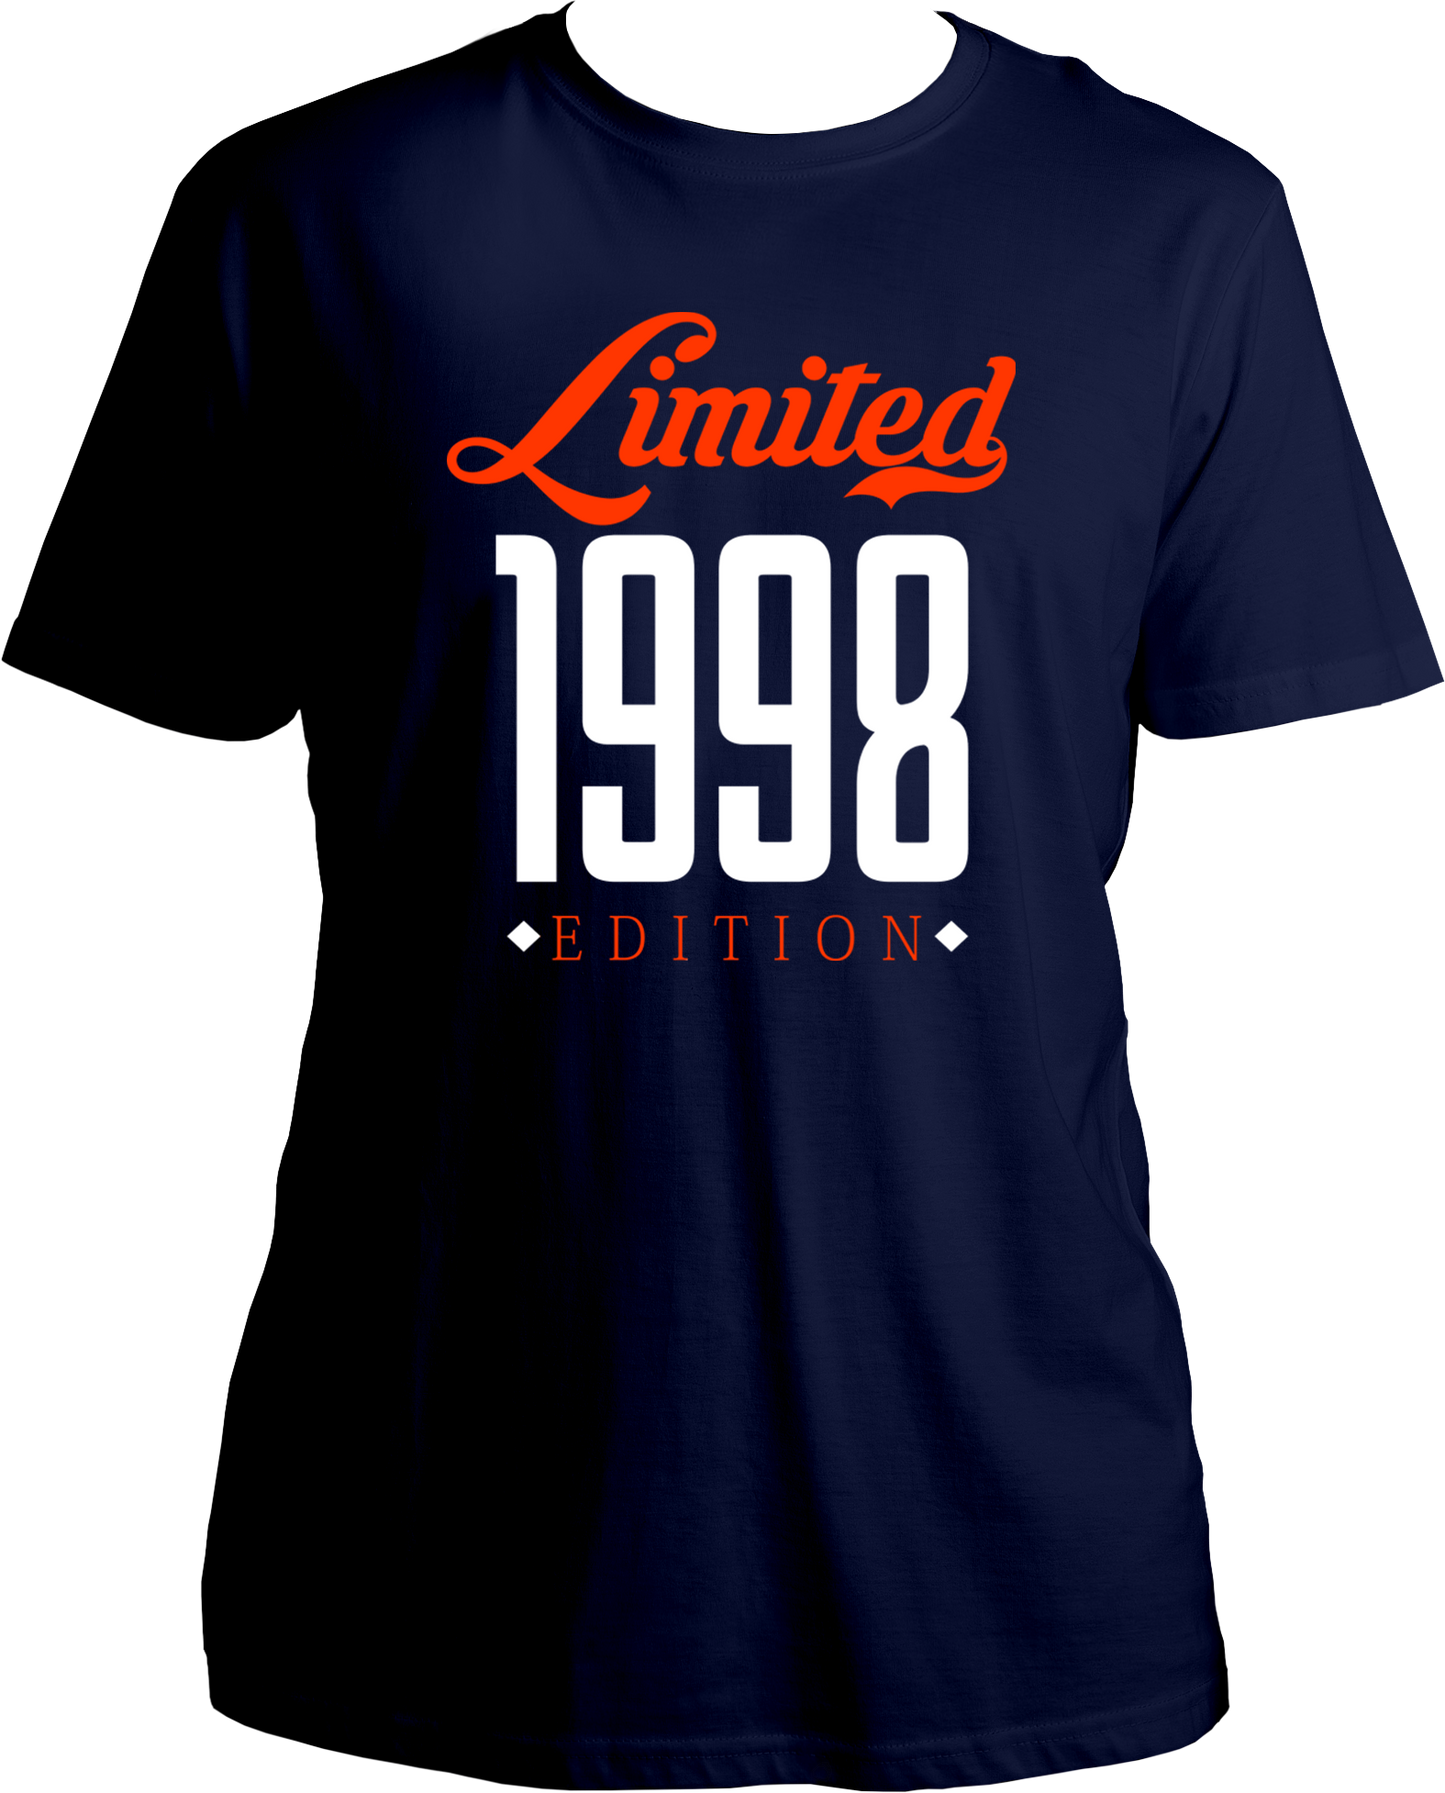 Limited 1998 Edition Unisex T-Shirts